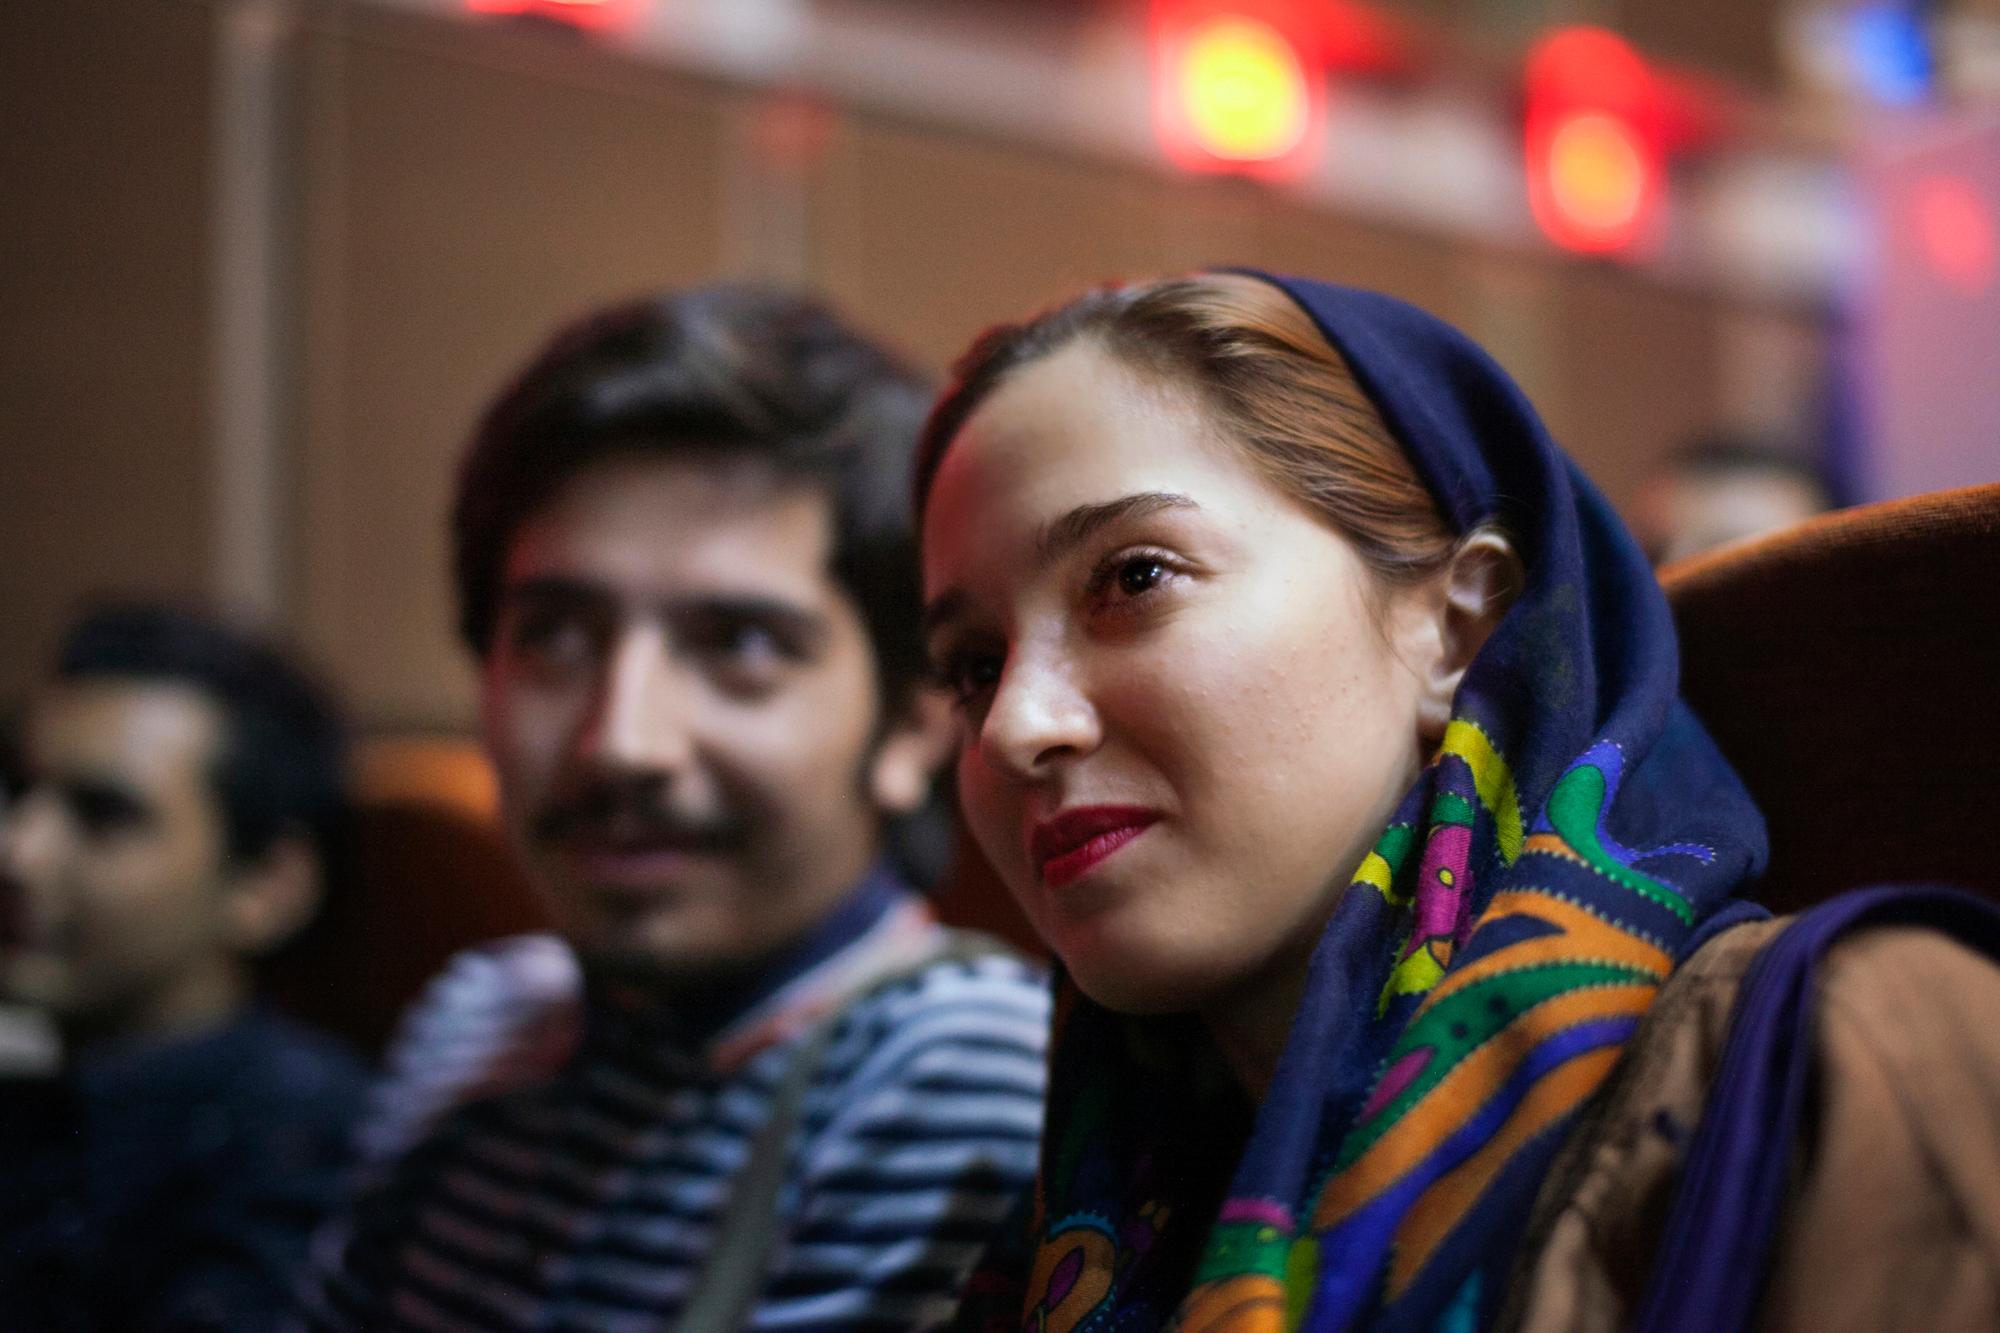 Tehran : the faces of freedom - During the weekend, Mahsa spends time with her friends....